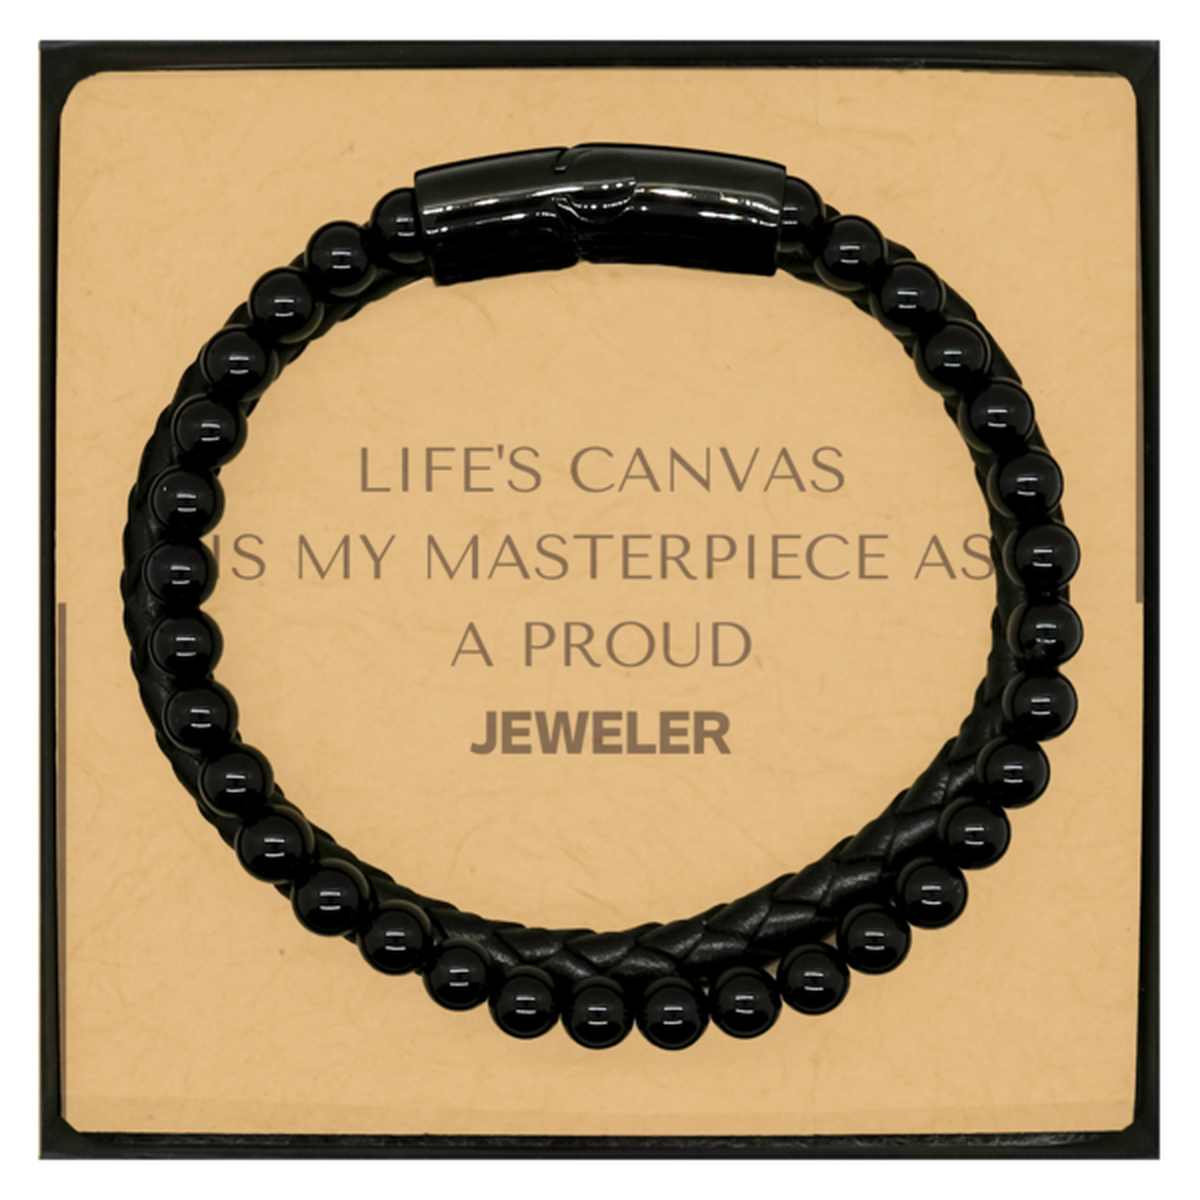 Proud Jeweler Gifts, Life's canvas is my masterpiece, Epic Birthday Christmas Unique Stone Leather Bracelets For Jeweler, Coworkers, Men, Women, Friends